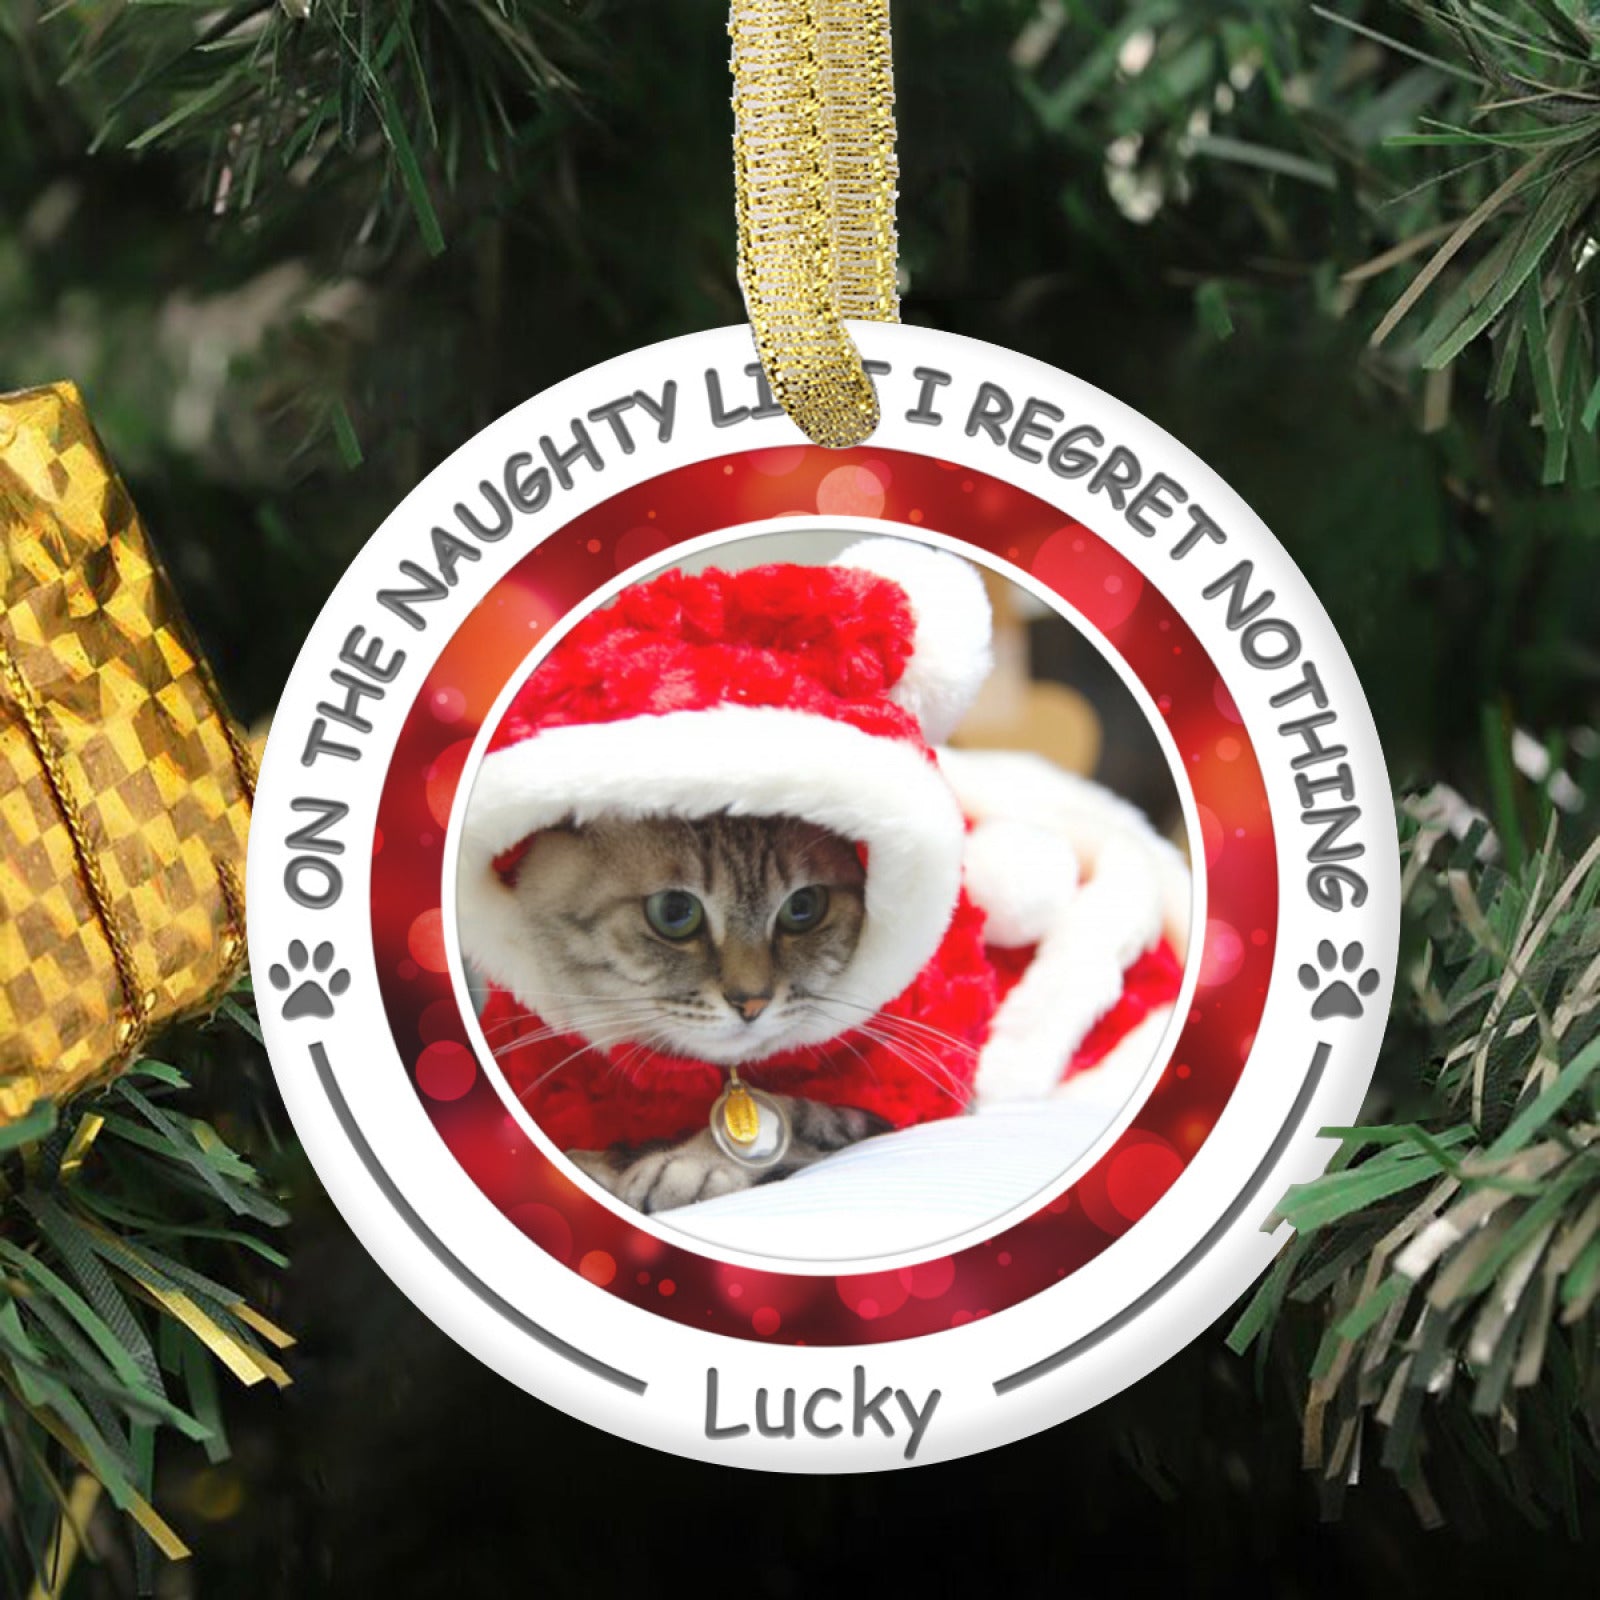 On The Naughty List I Regret Nothing - Personalized Custom Round Shaped Ceramic Photo Christmas Ornament - Upload Image, Gifts For Pet Lovers, Christmas Gifts